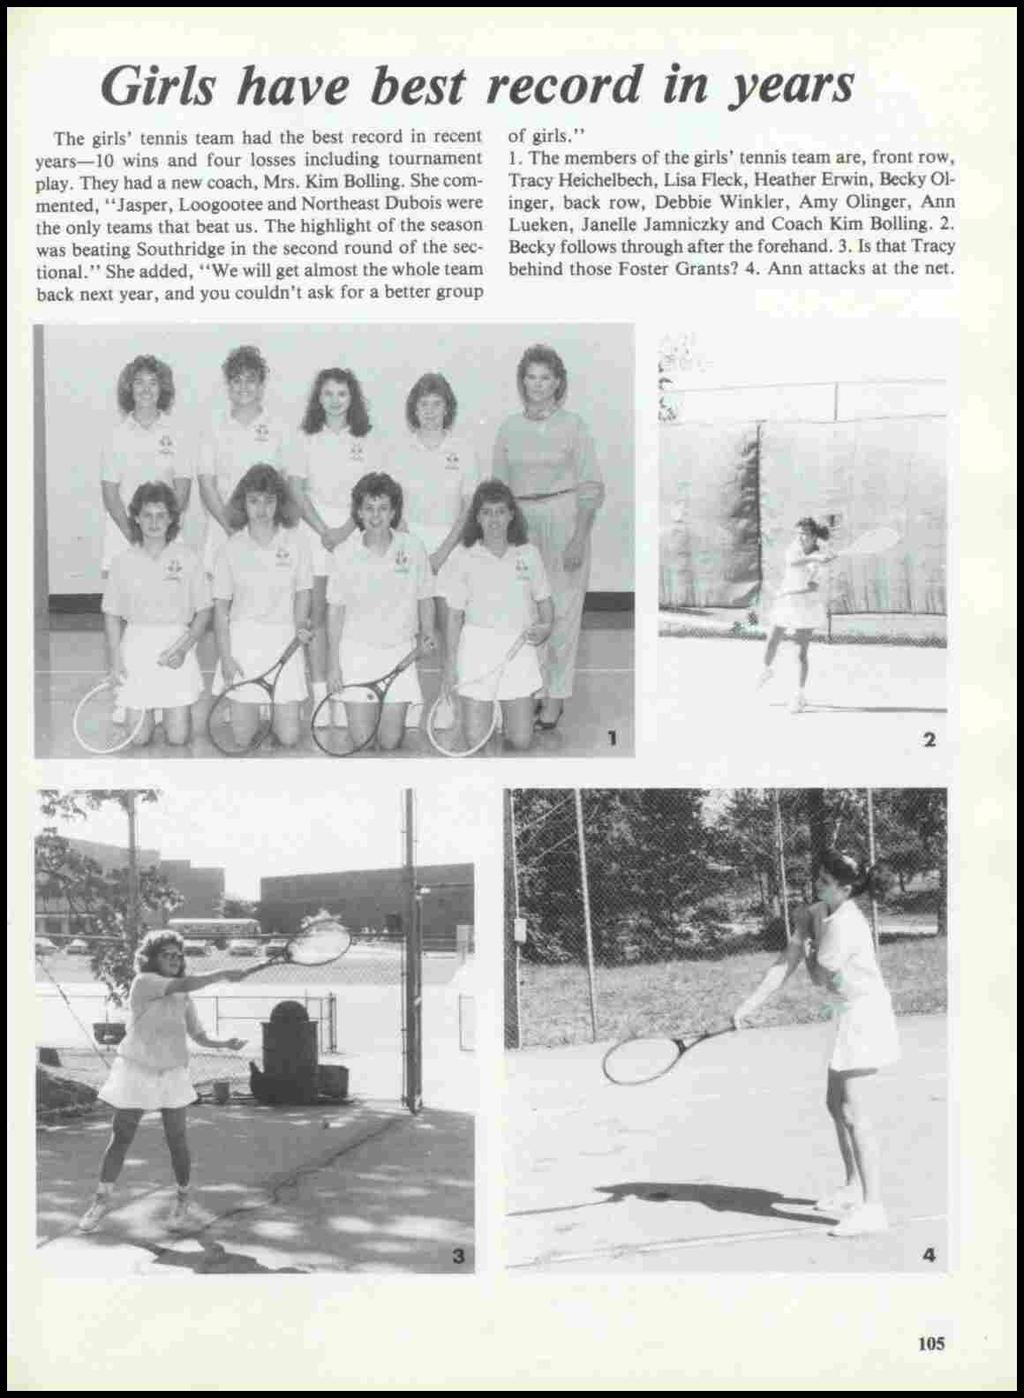 Girls have best record in years The girls' tennis team had the best record in recent years-10 wins and four losses including tournament play. They had a new coach, Mrs. Kim Bolling.